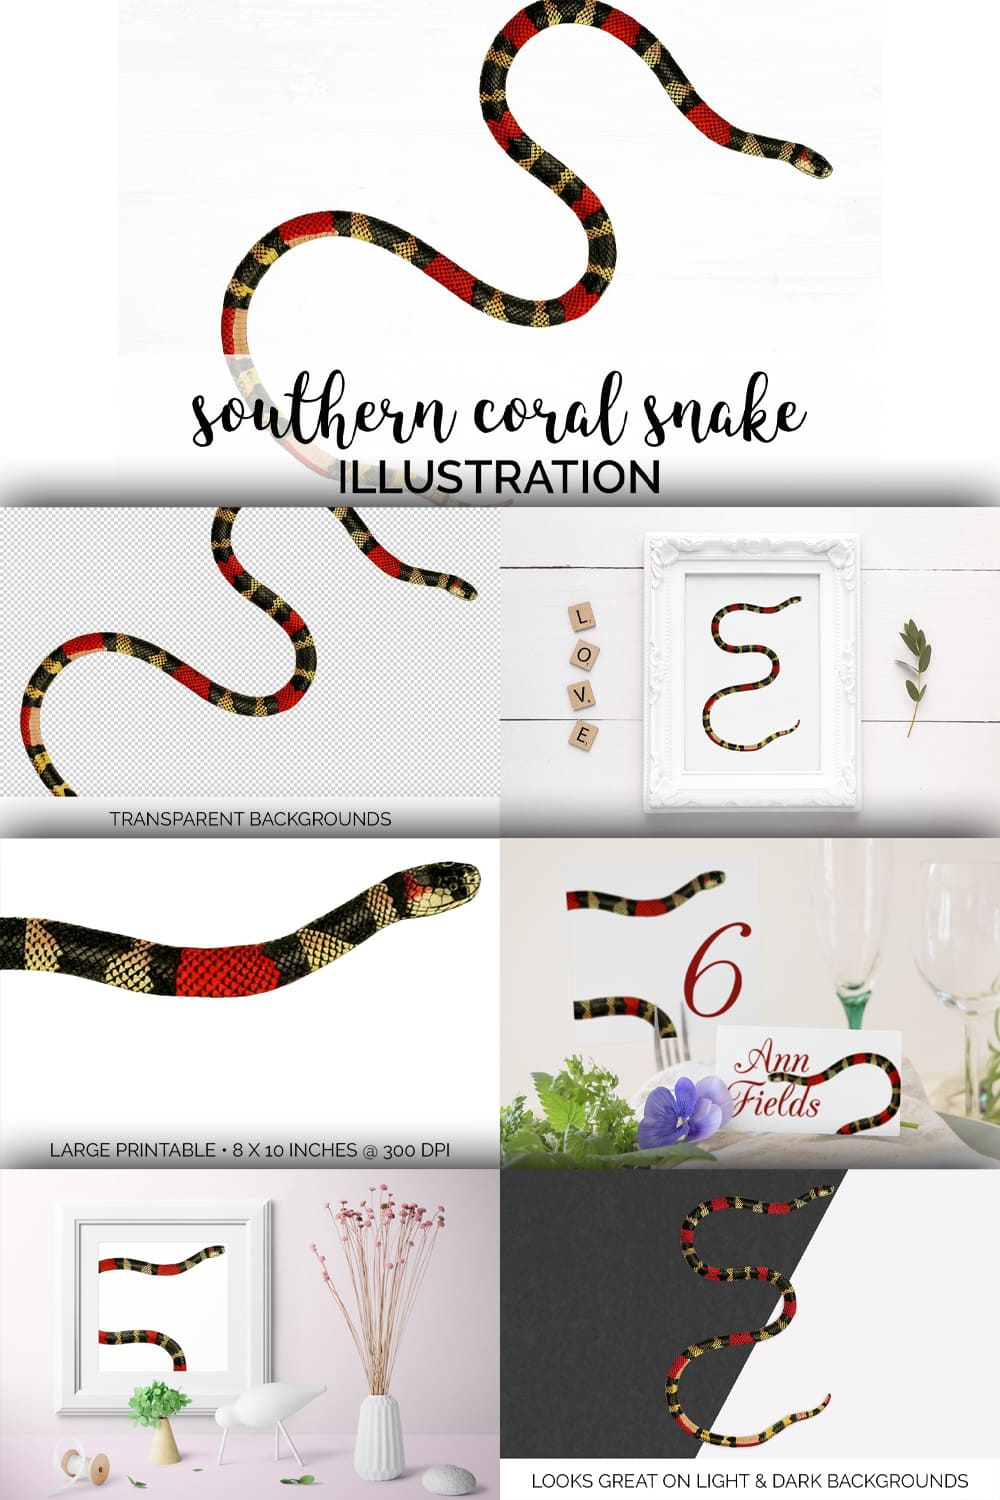 Collection of colorful images coral snake.